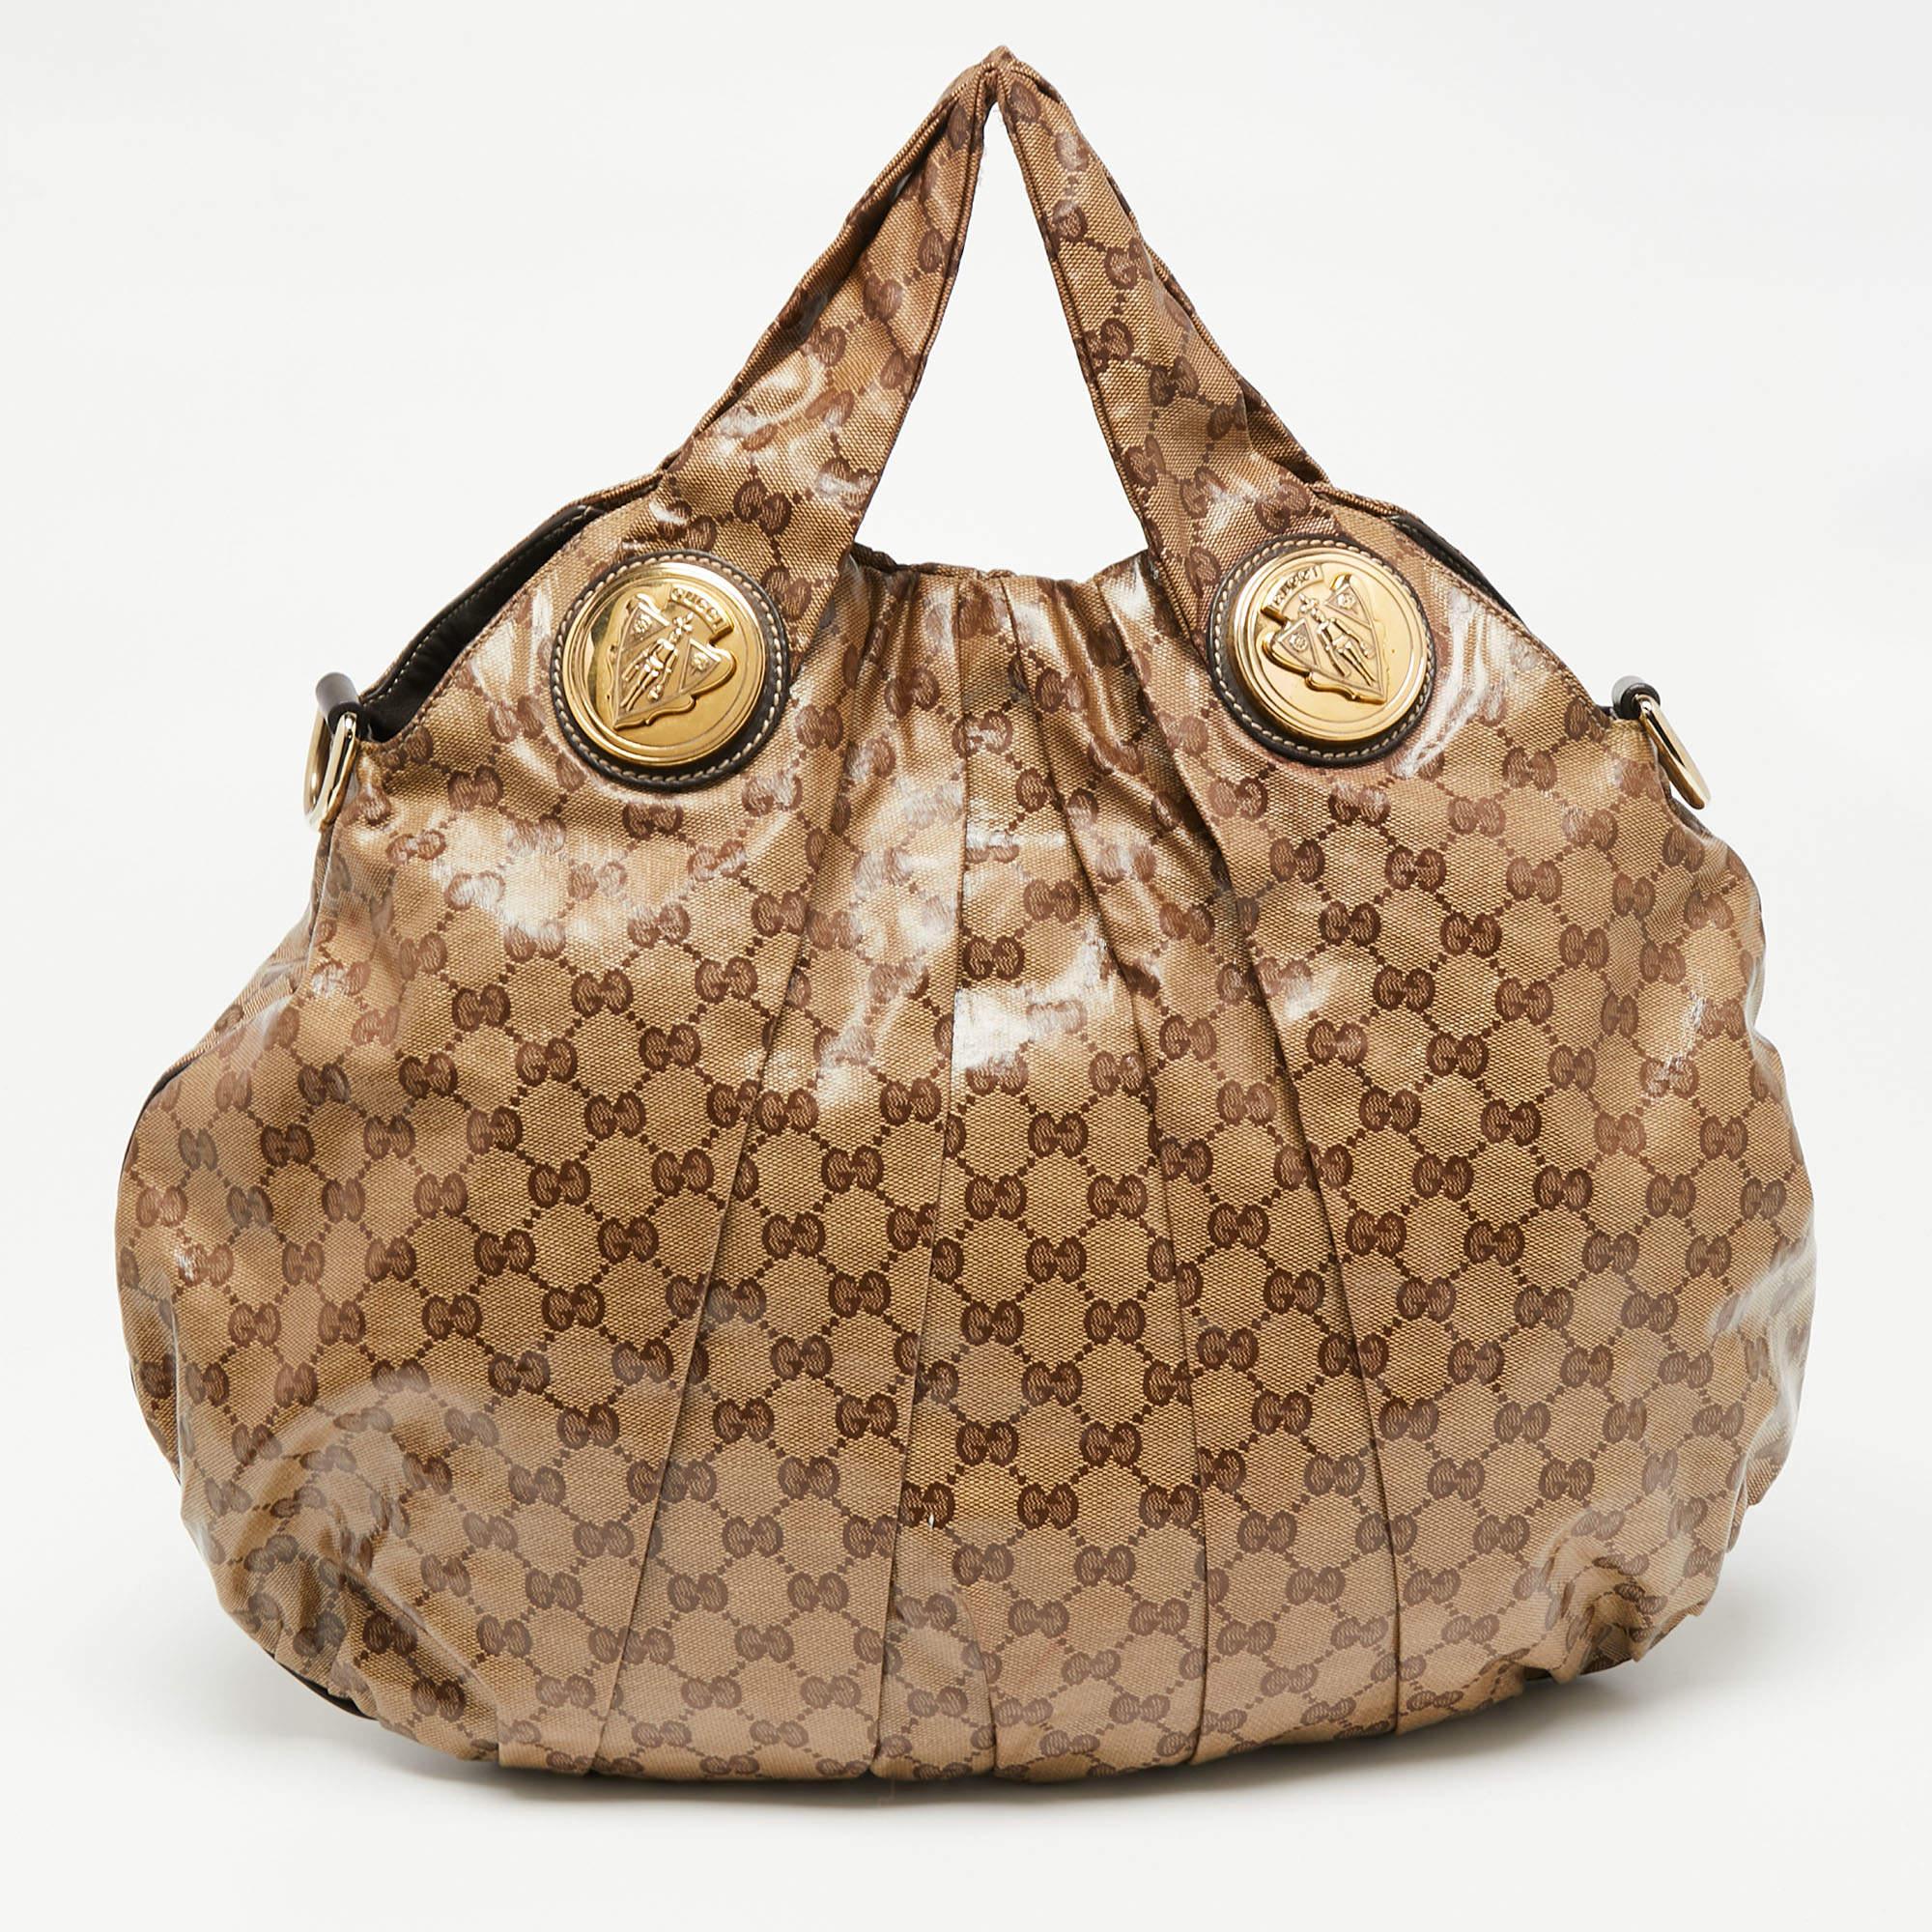 Introduced in 2008, the Gucci Hysteria is loved and admired by style enthusiasts all around the world. The fabric and leather interior of this tote is spaciously sized to keep your daily belongings safe. Created from the signature GG crystal canvas